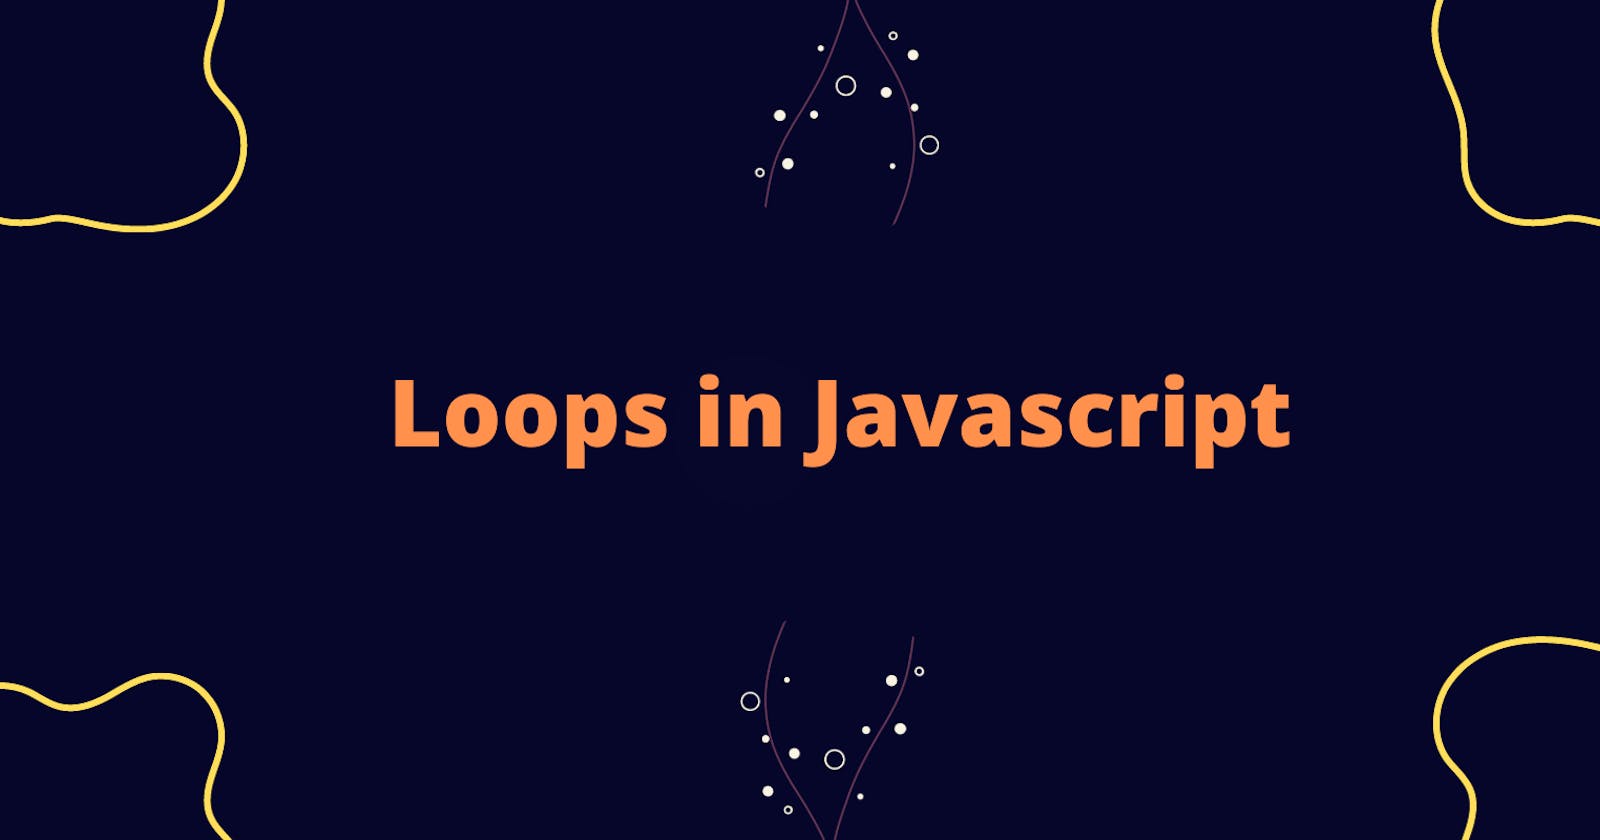 JavaScript Loops - Do...while loops, for...in loops and more